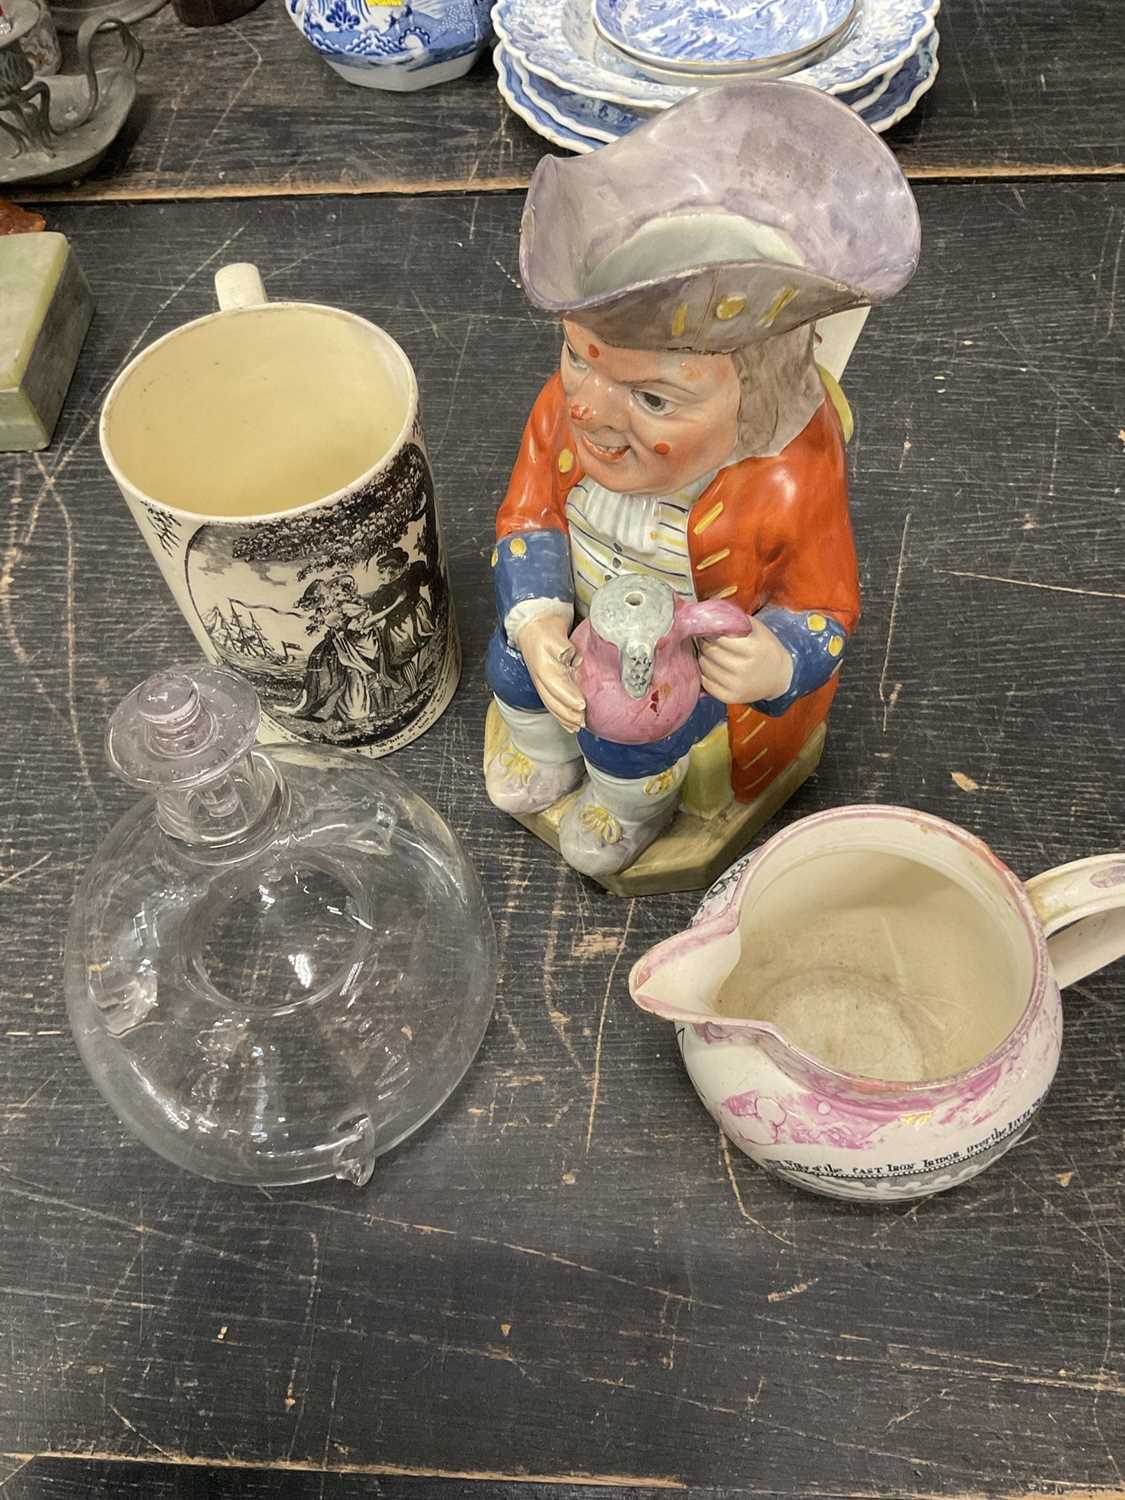 Lot 146 - Early 19th century pearl ware Toby jug, together with a Leeds type creamware tankard, a 19th century blown glass wasp catcher and a Sunderland lustre jug